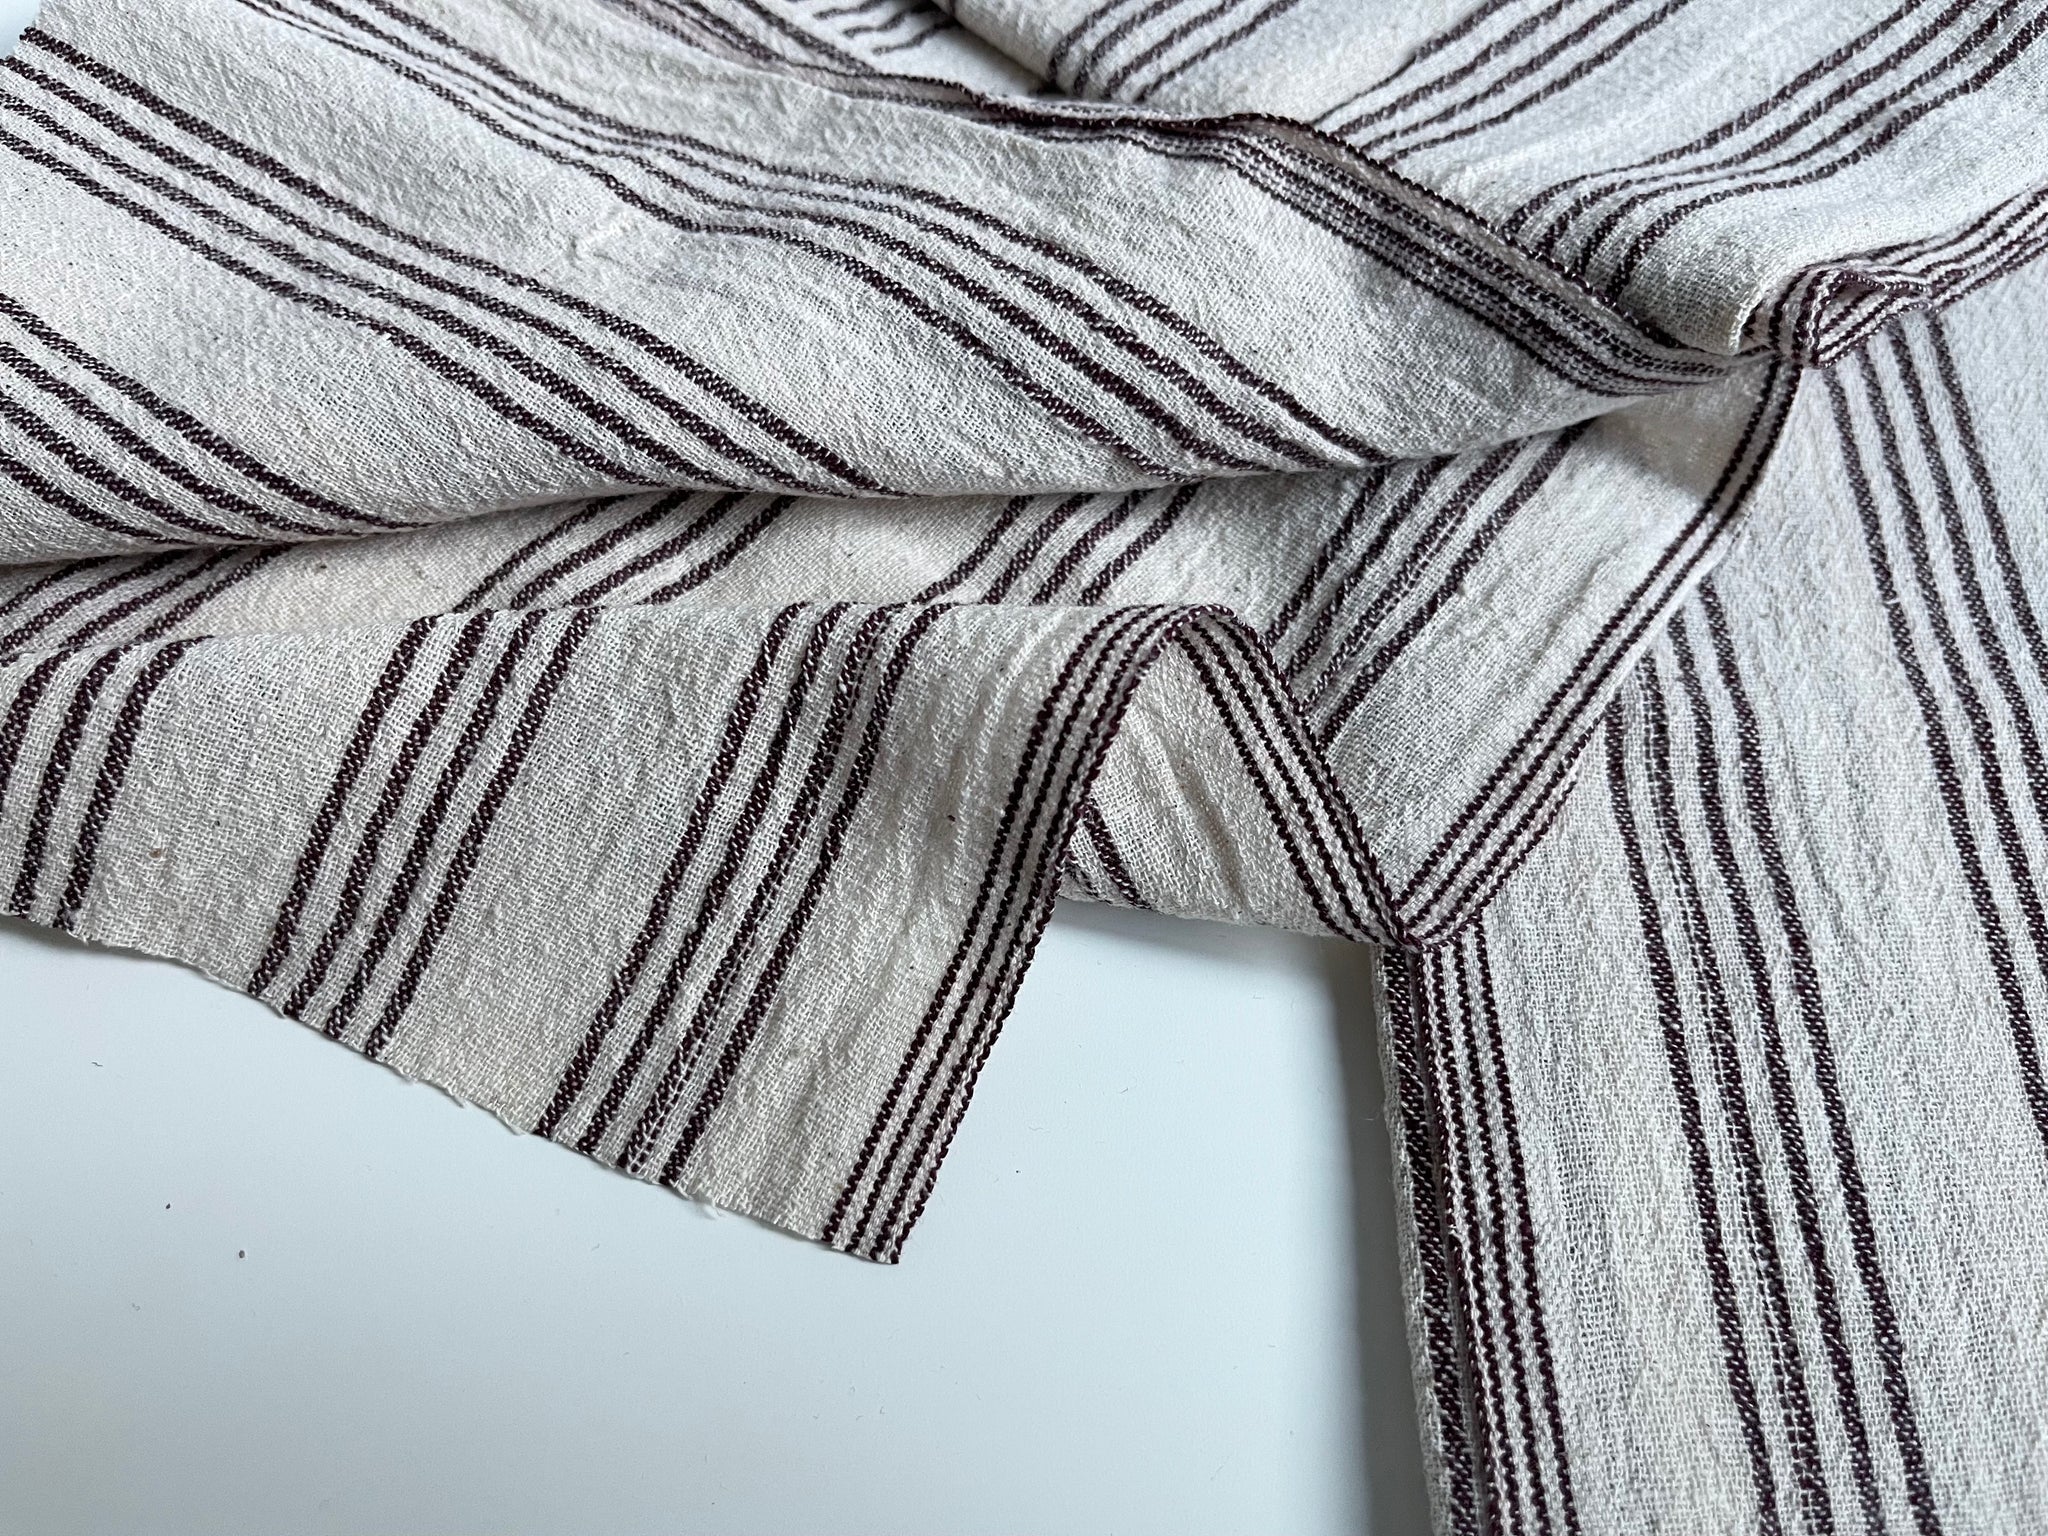 Handwoven Cotton Fabric Remnants - Earthy Stripe